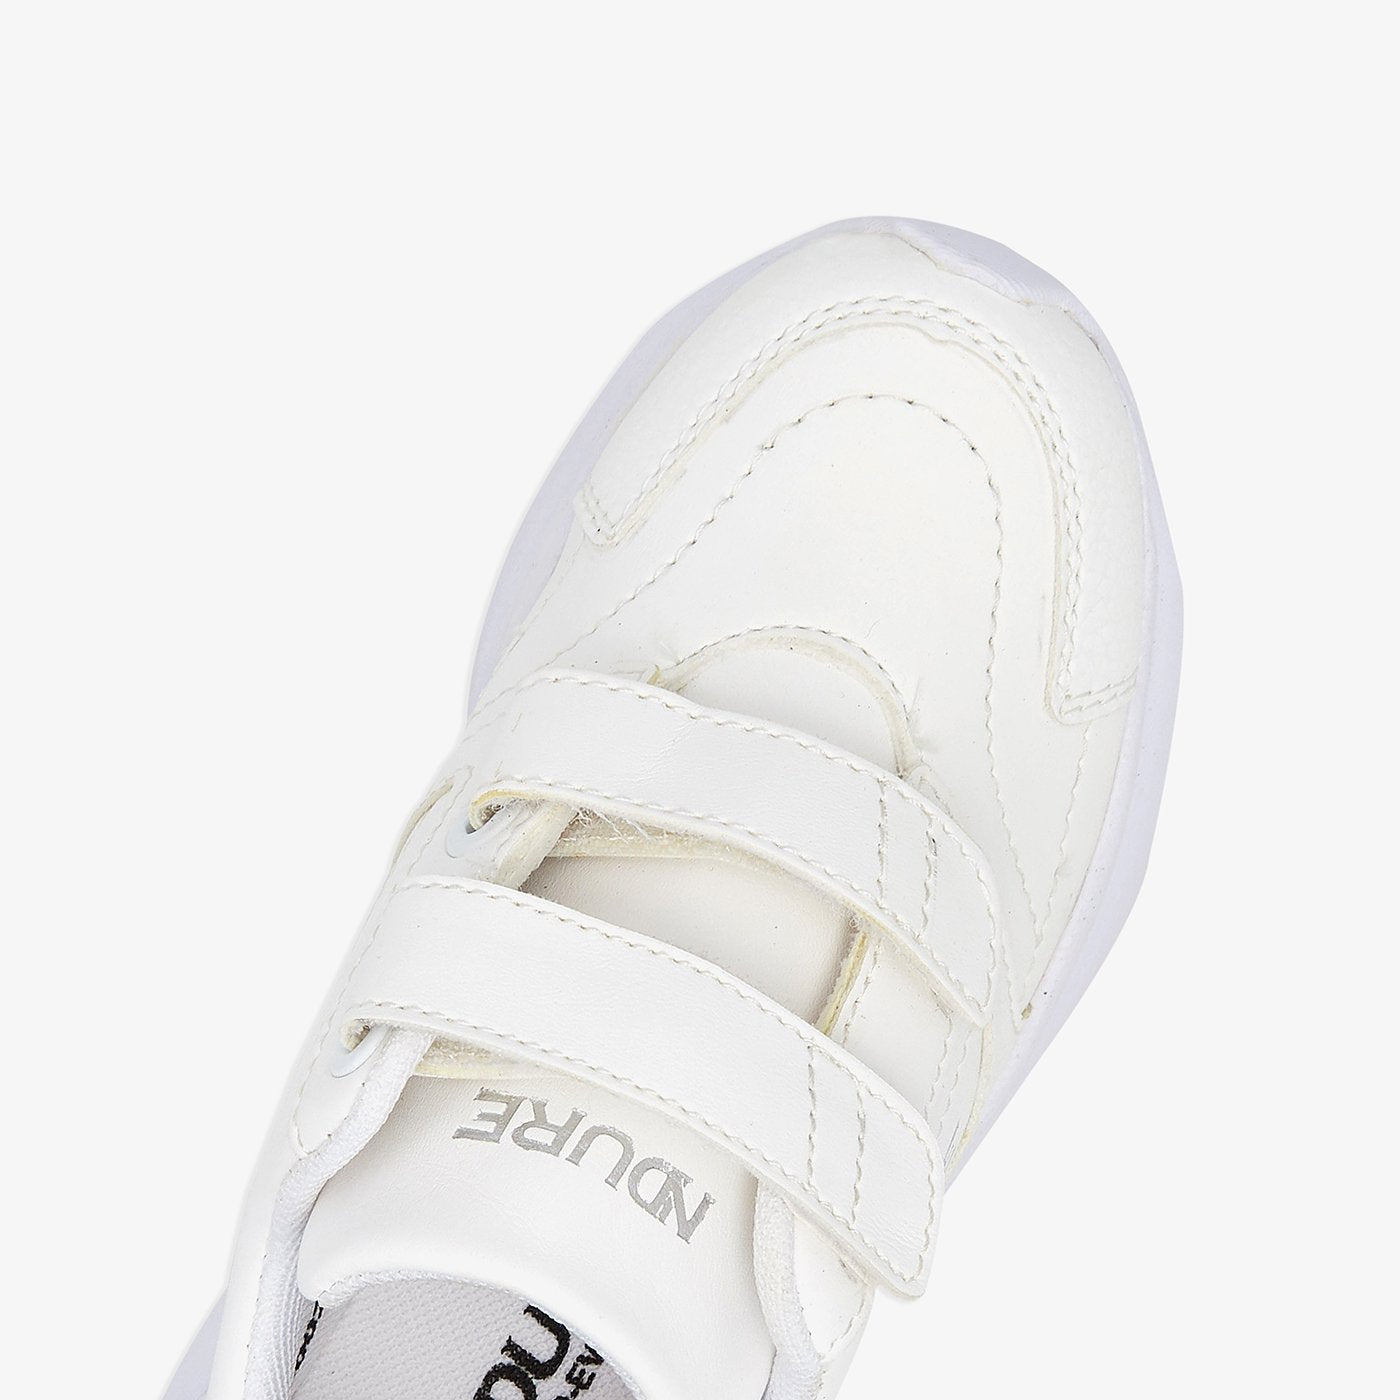 Women Casual White Shoes - Buy Women Casual White Shoes online in India